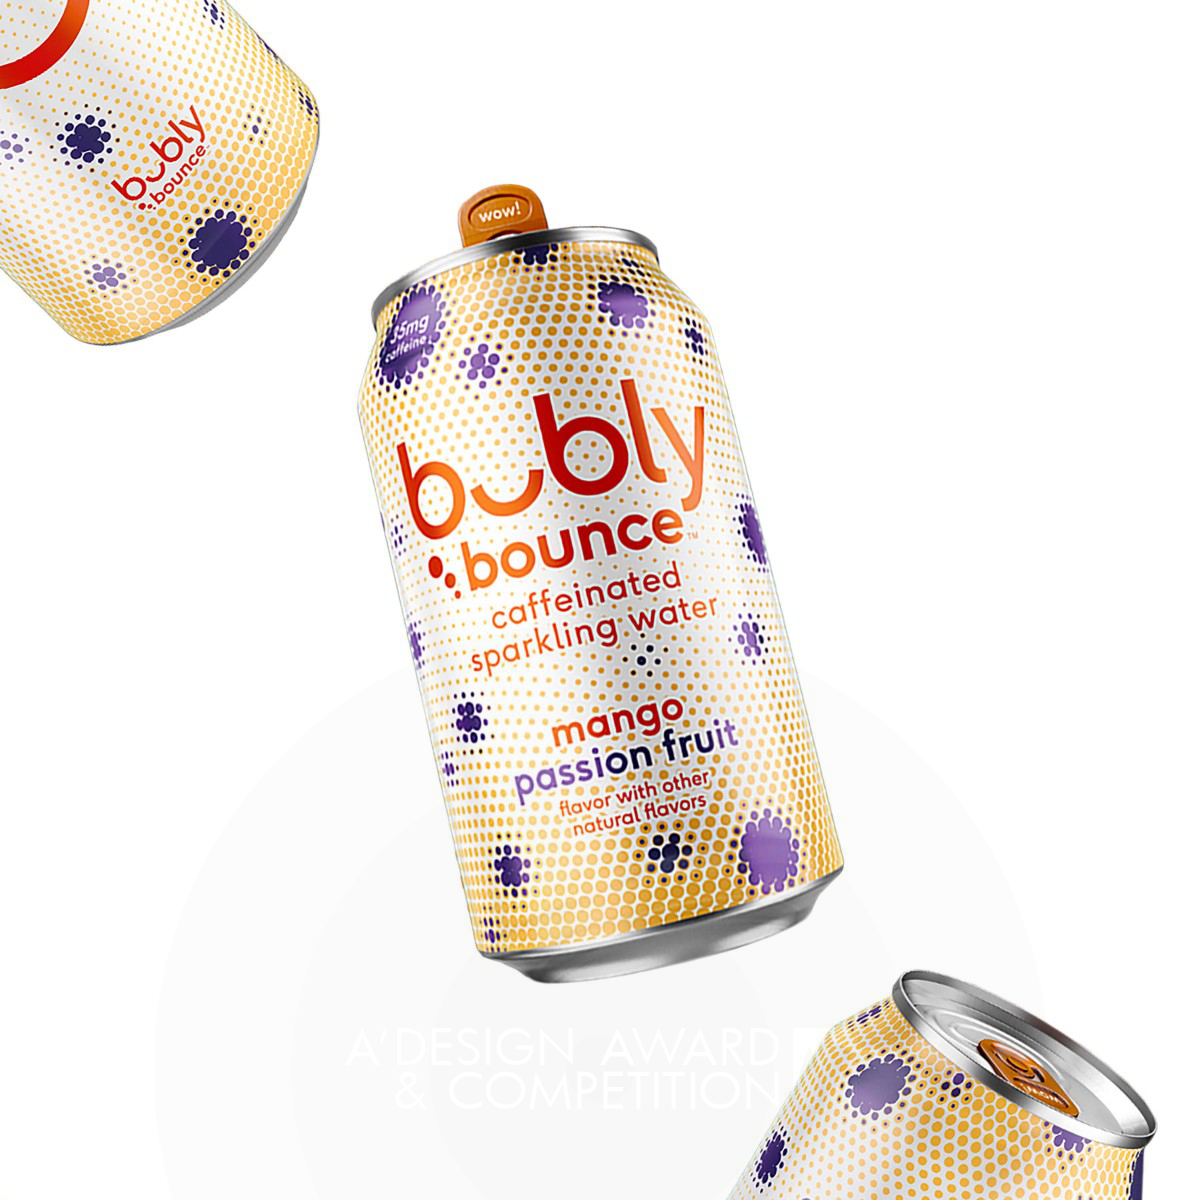 Bubly Bounce Beverage Packaging by PepsiCo Design and Innovation